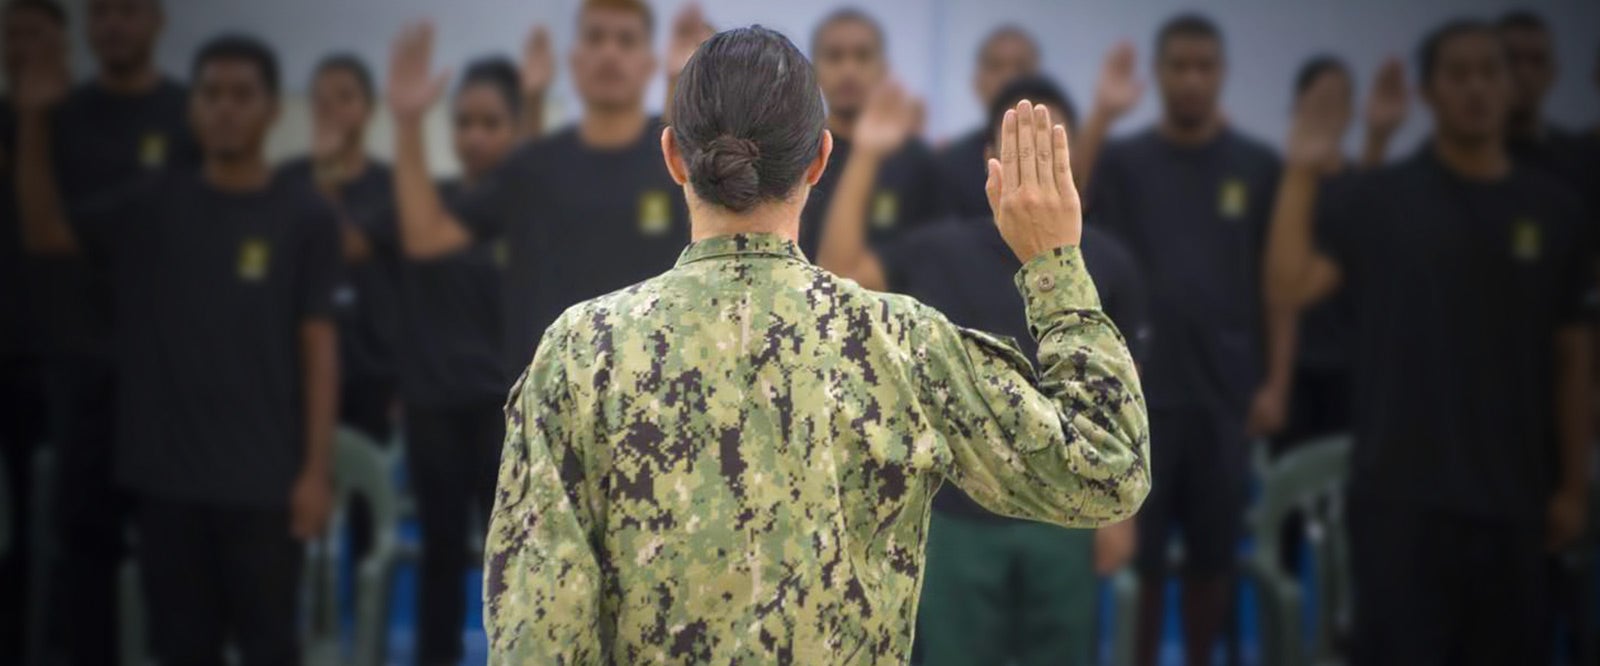 A group of young soldiers raising their hands during a military enlistment ceremony.